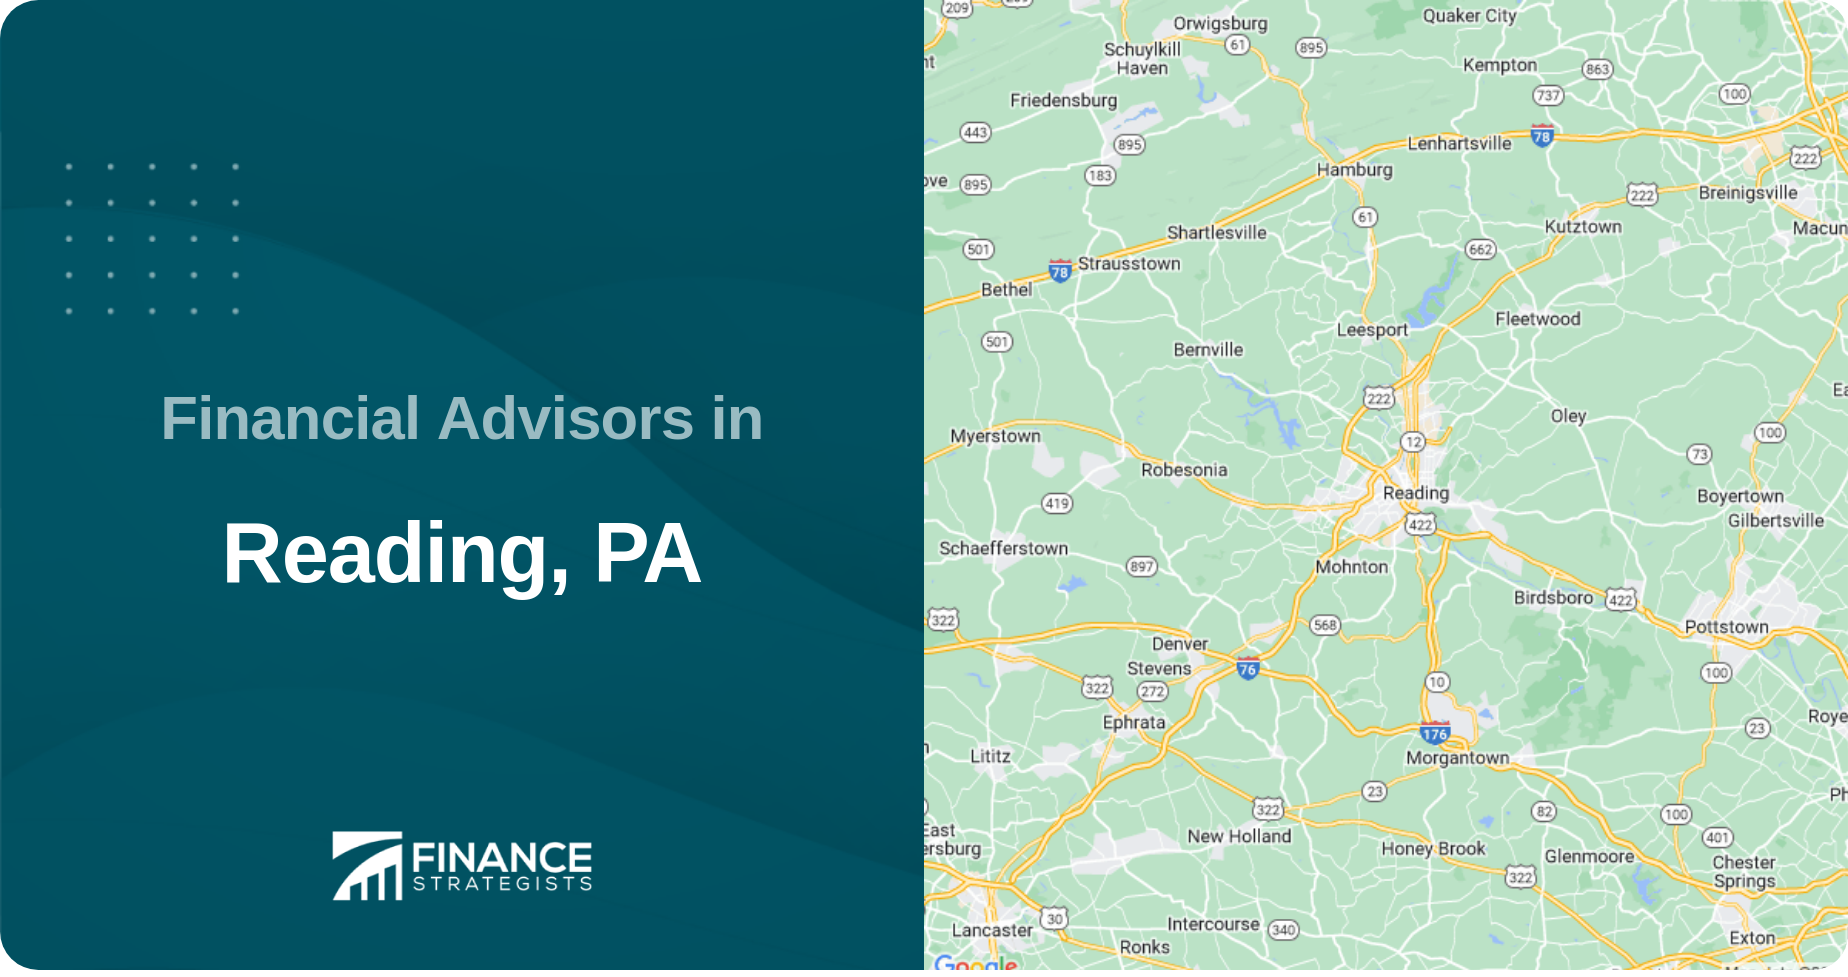 Financial Advisors in Reading, PA